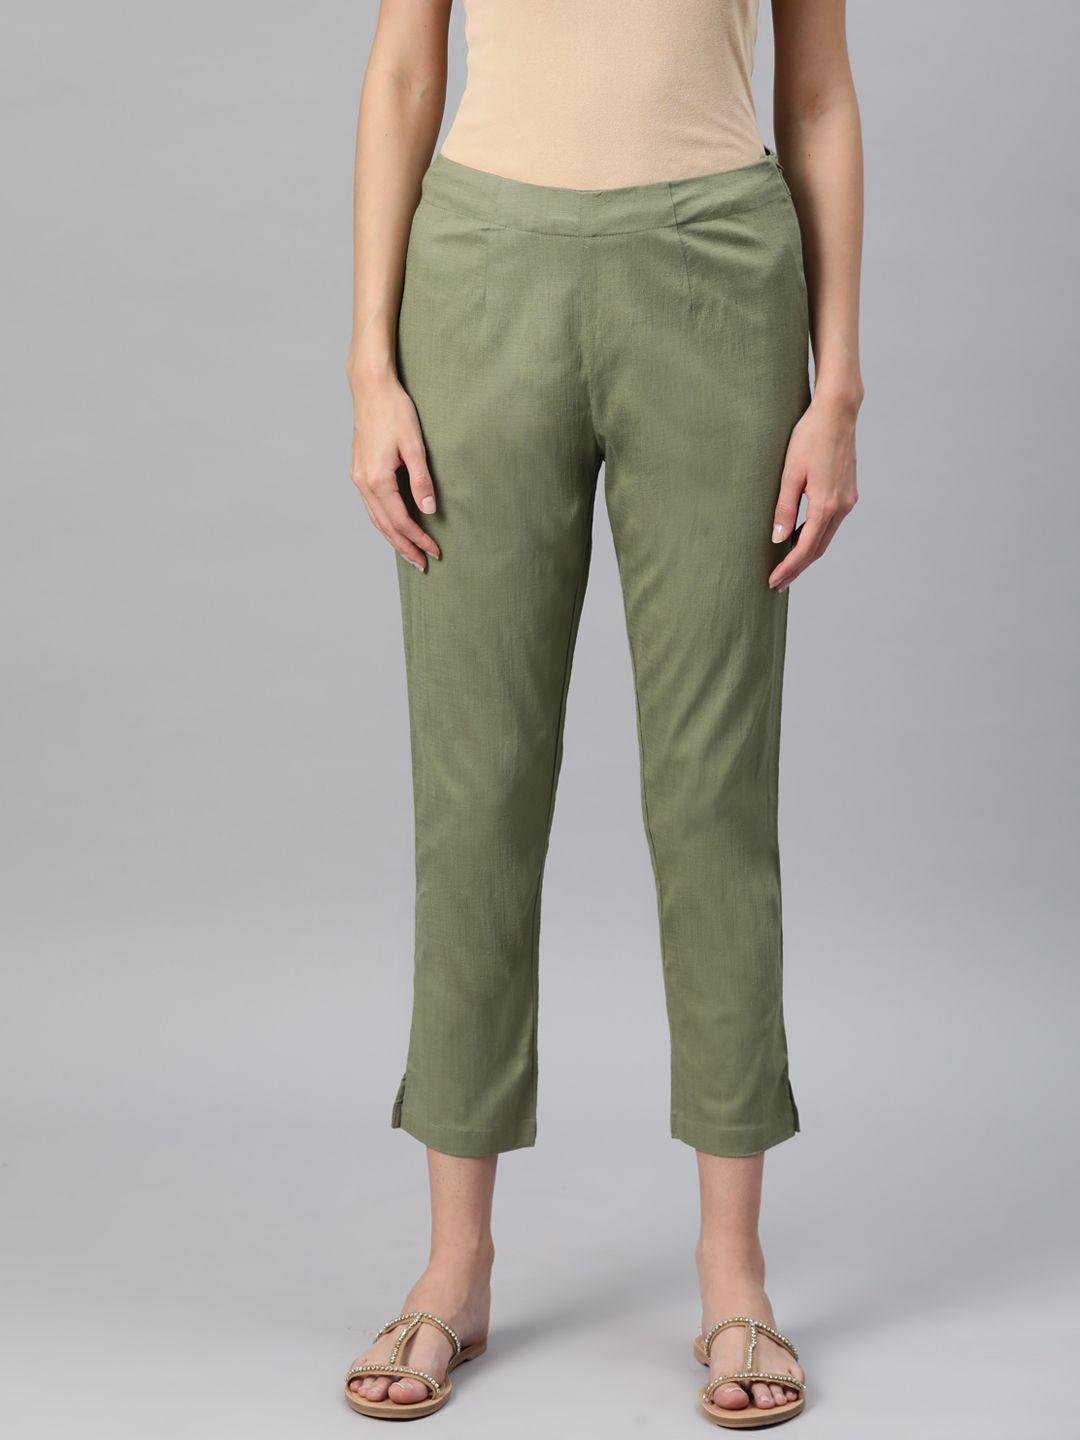 readiprint fashions easy wash cropped trousers